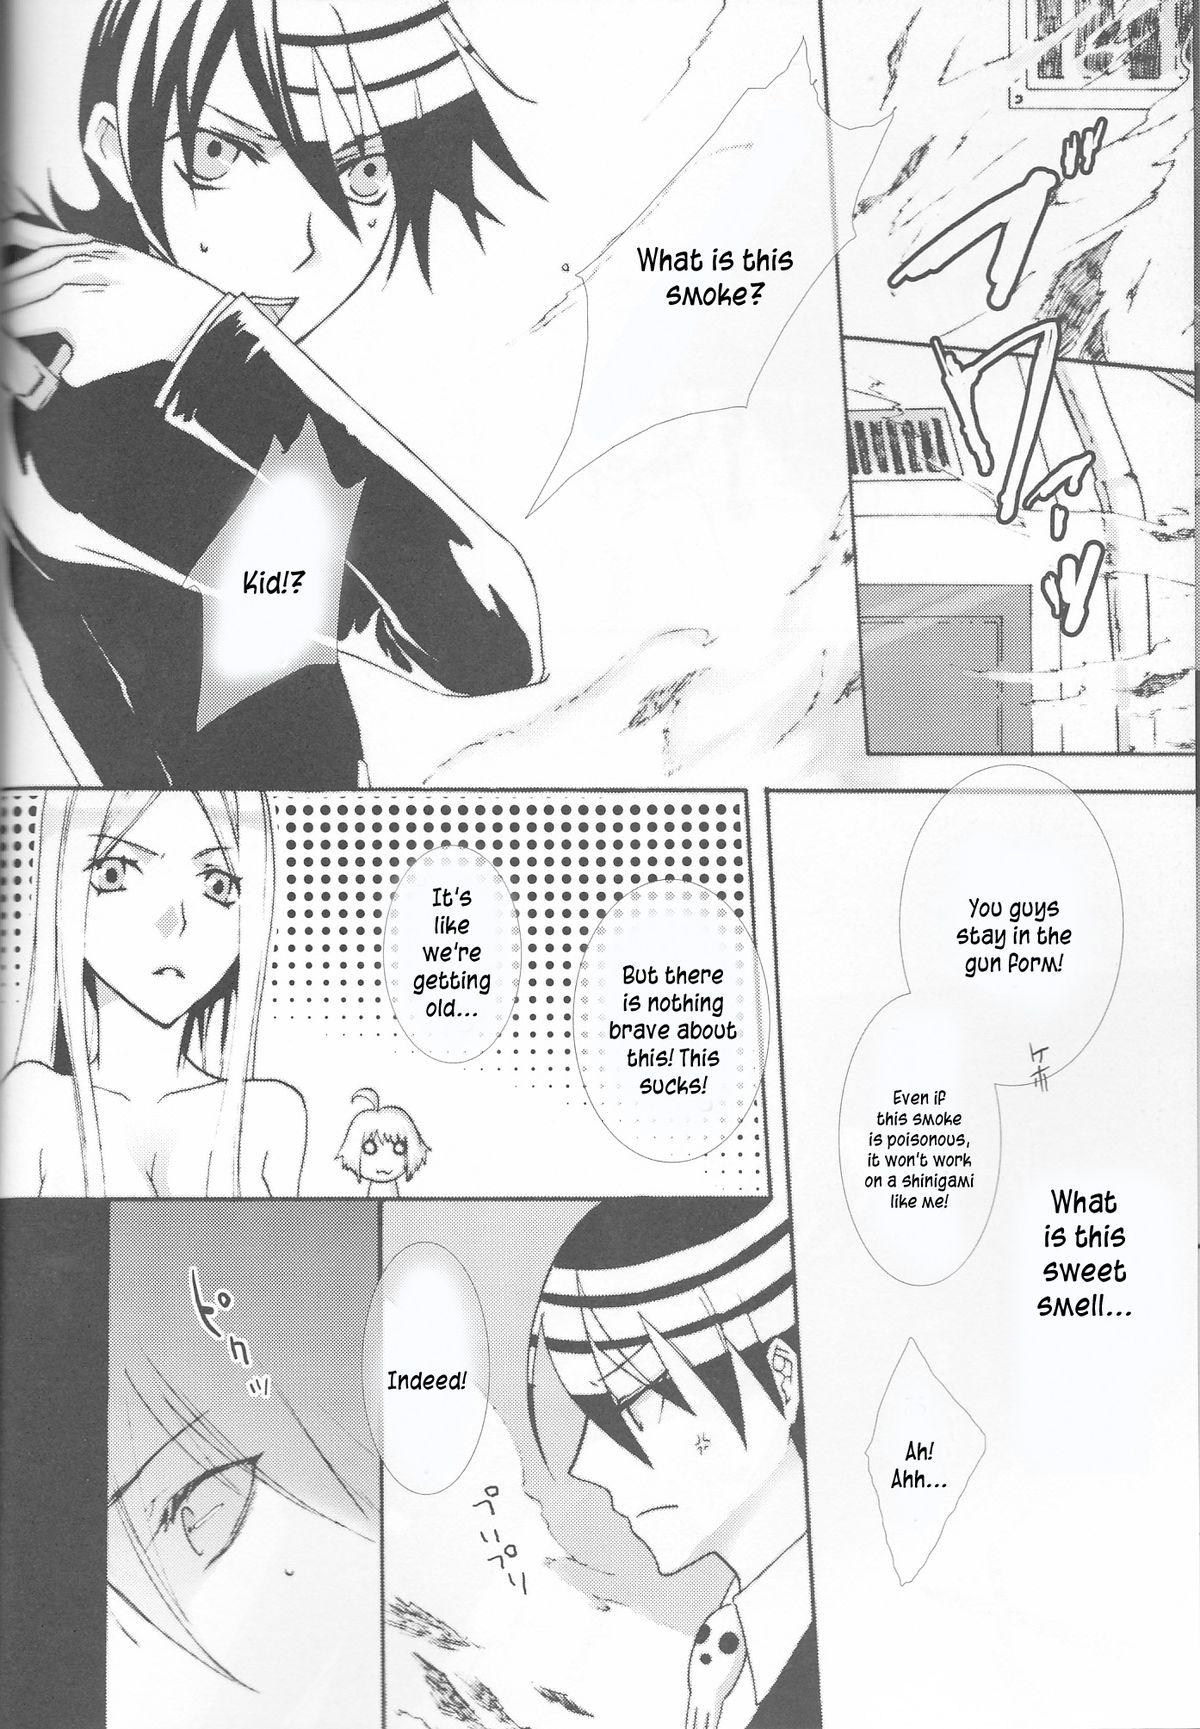 Classic Camical Candy Show Case - Soul eater Babe - Page 5